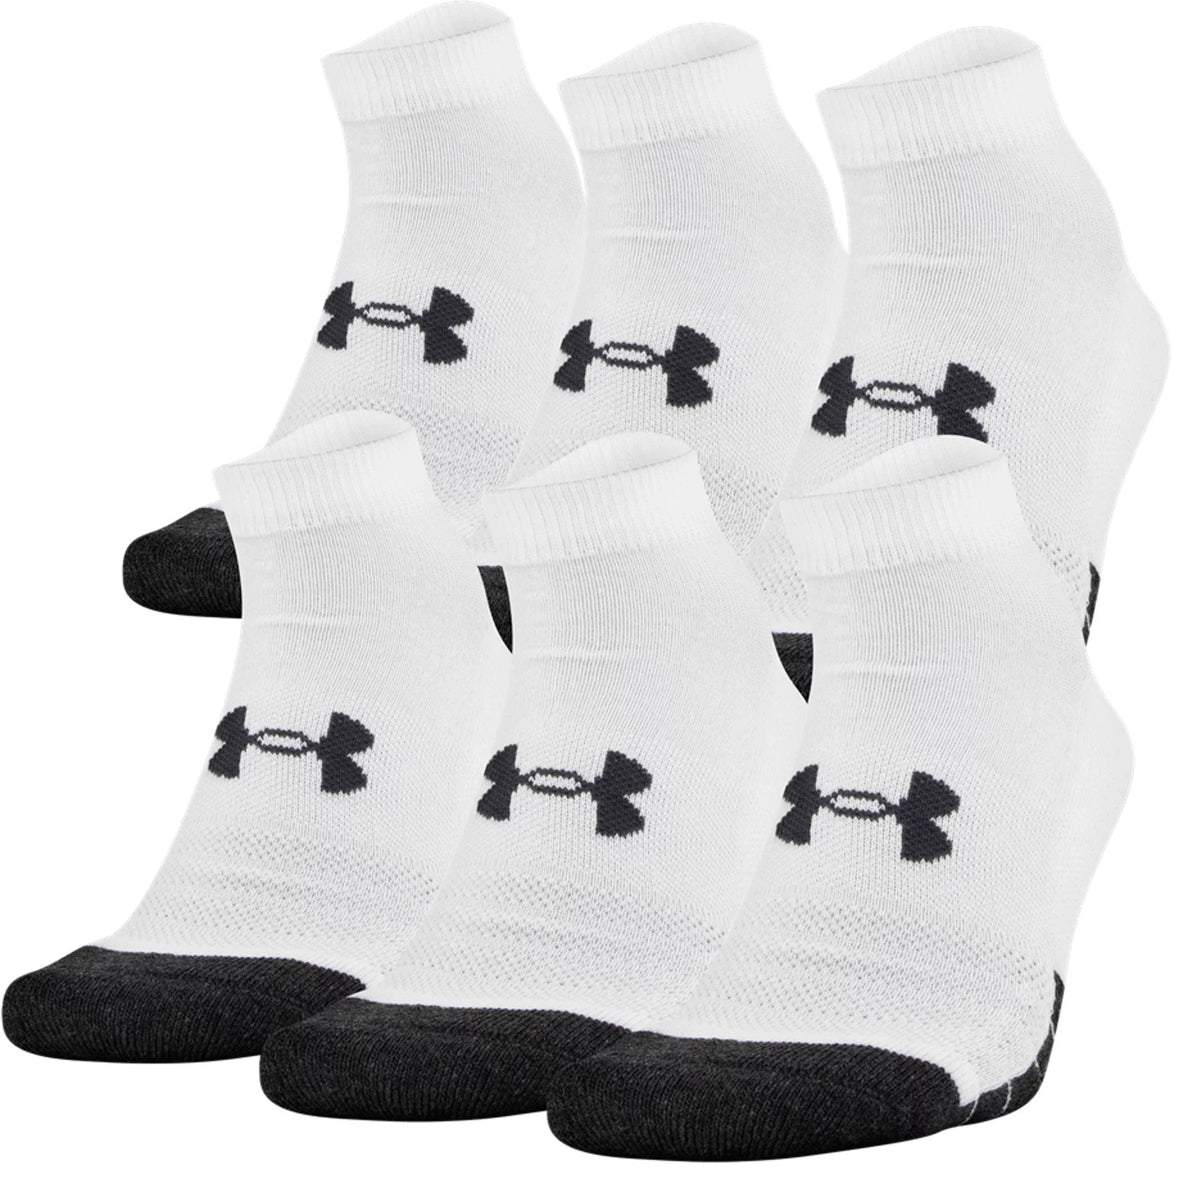 Under Armour Performance Tech Low Cut Socks 6-Pack